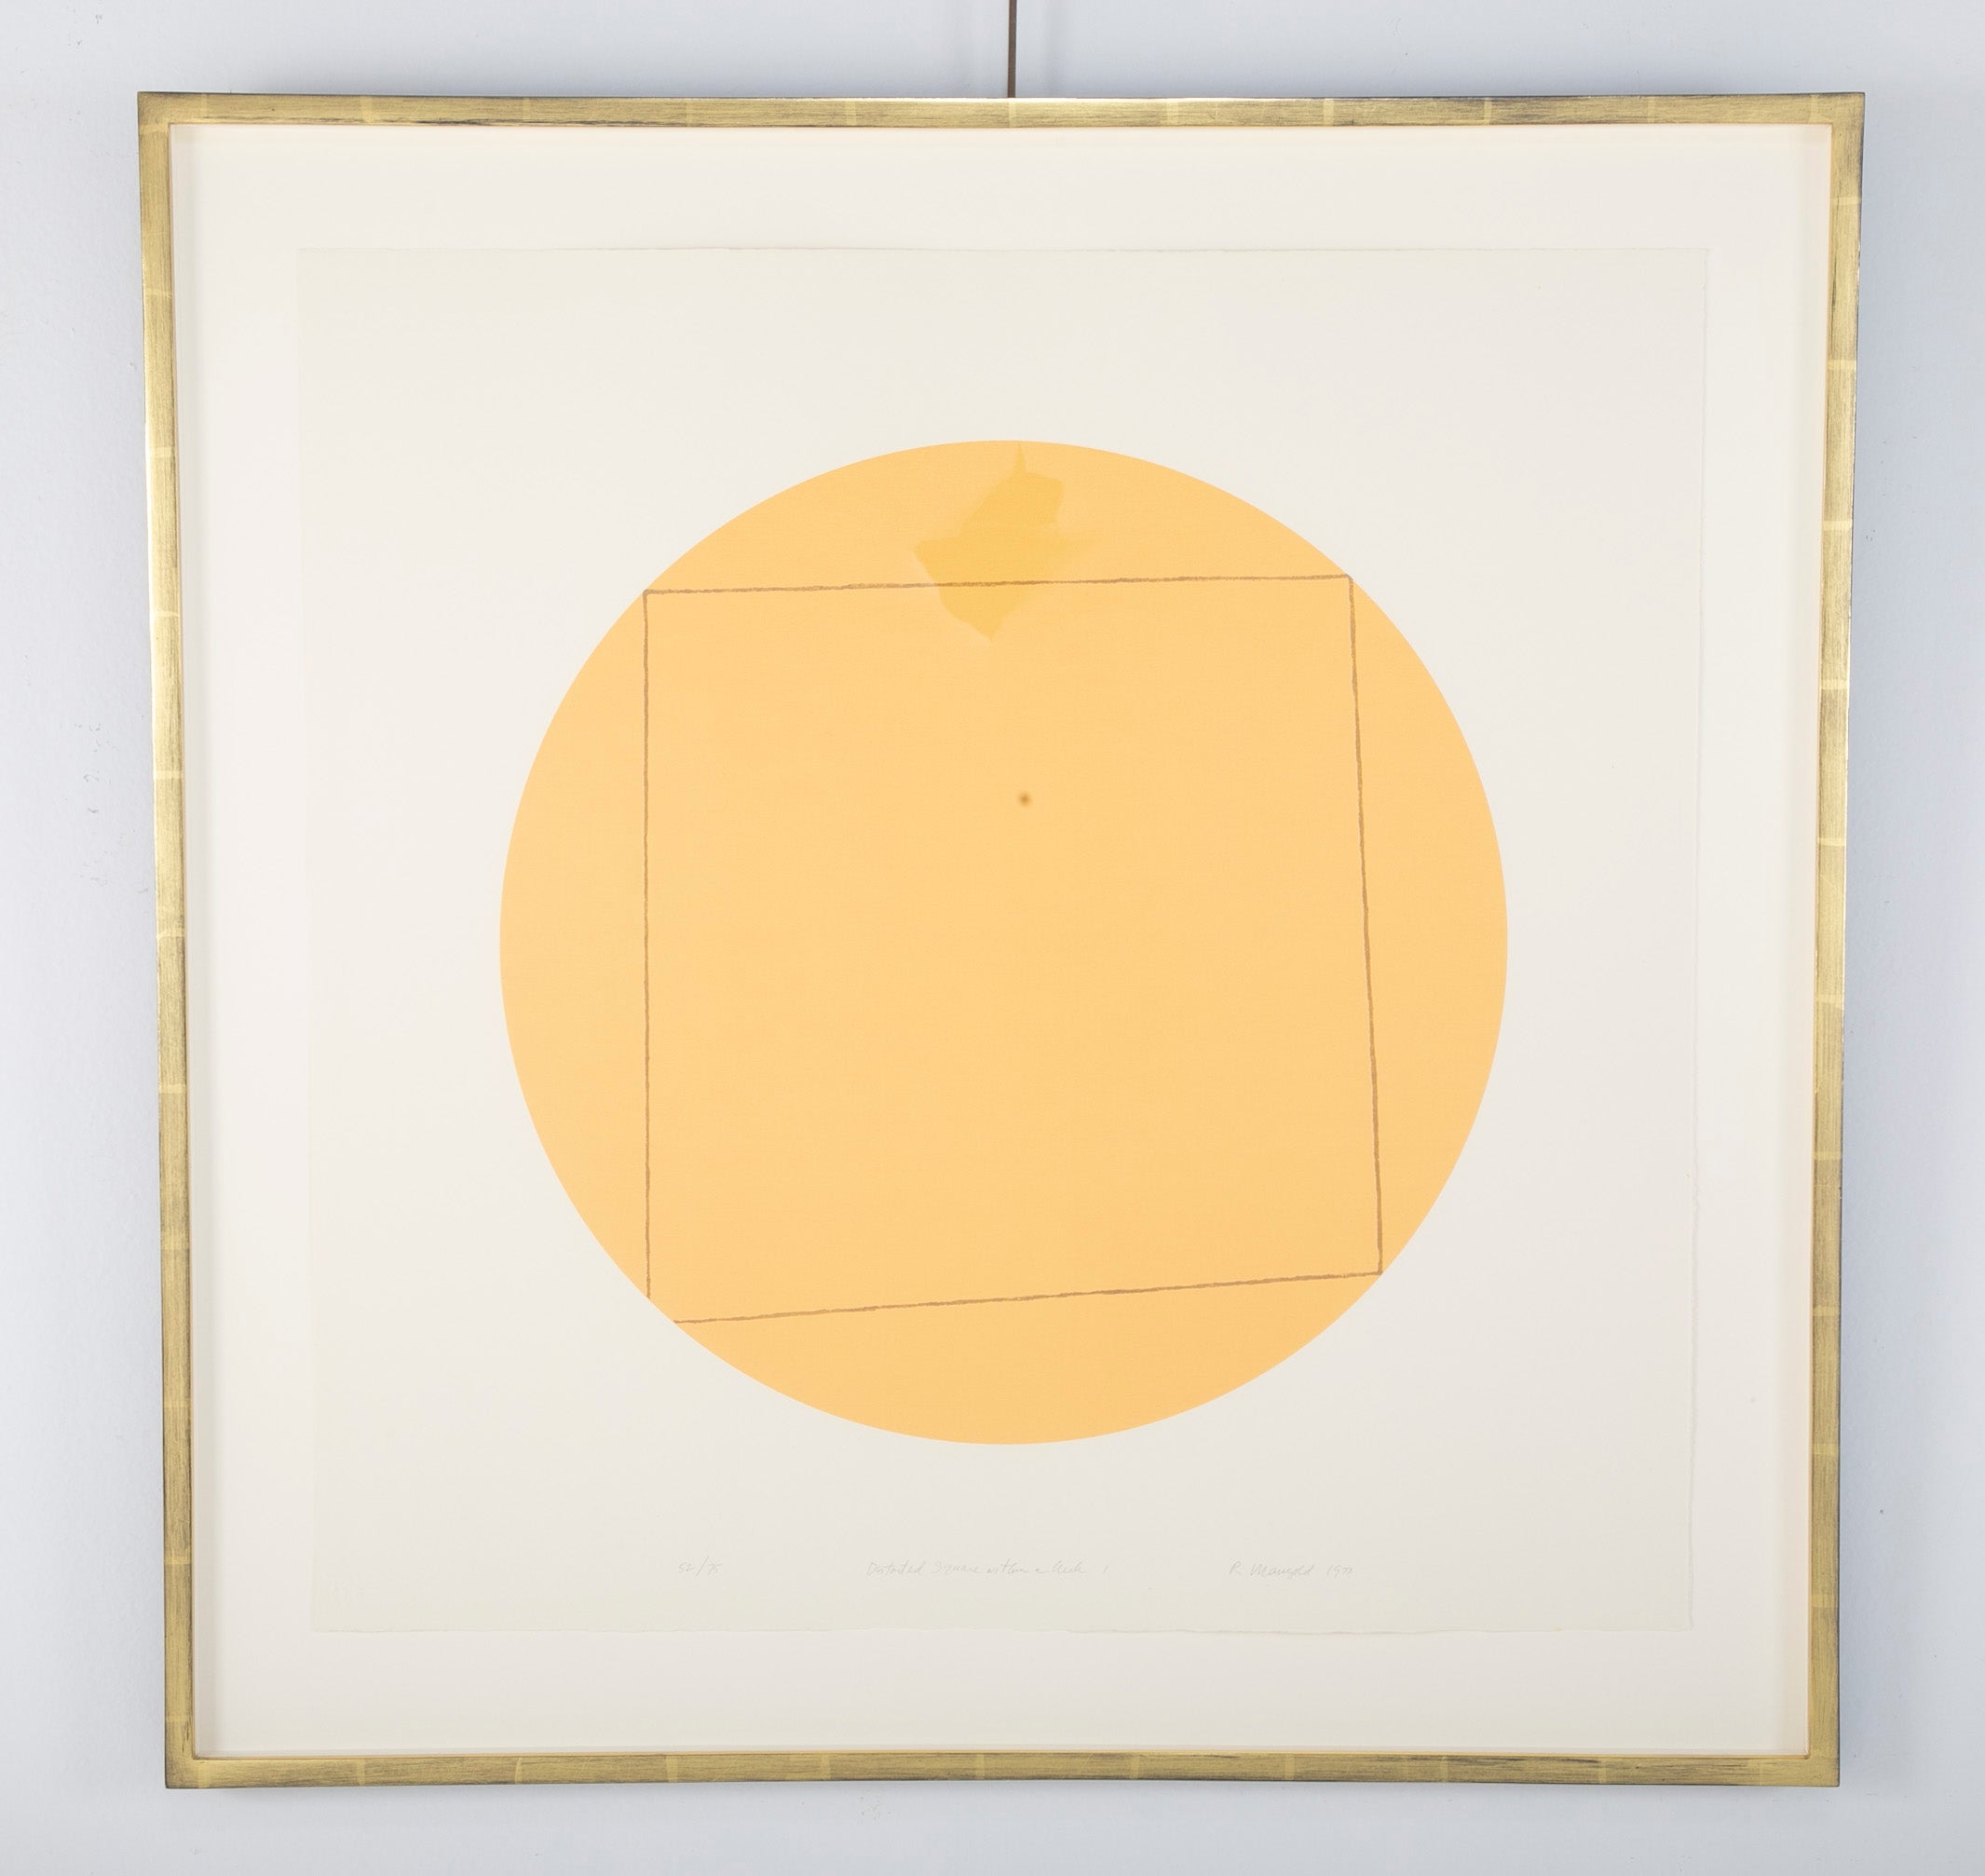 "Distorted Square Within a Circle 1" Color Screenprint by Robert Mangold